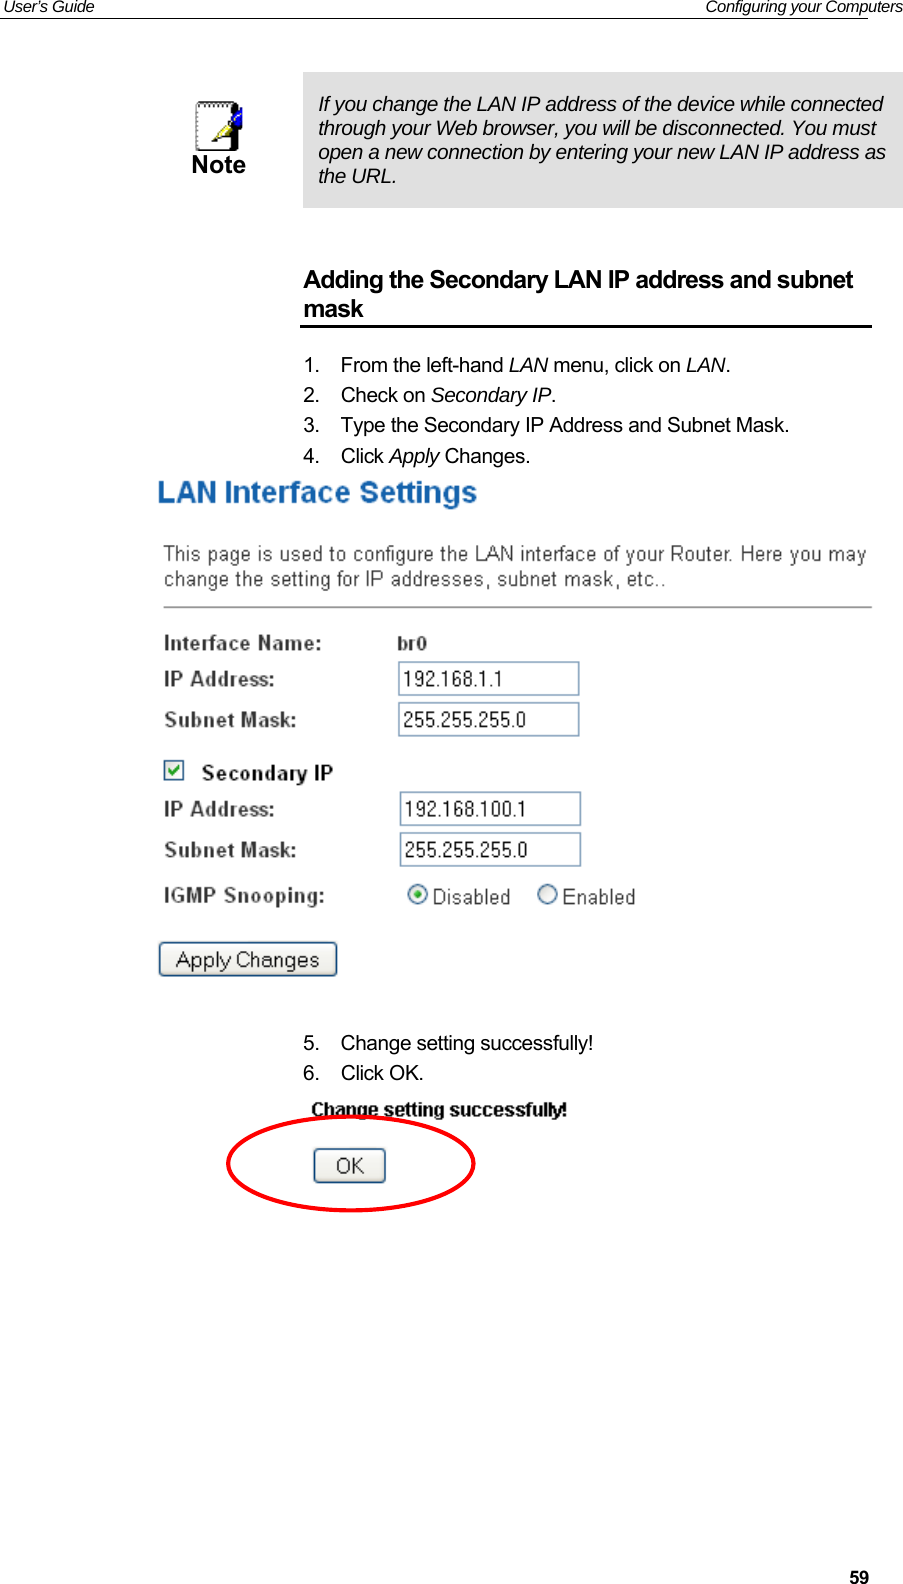 User’s Guide   Configuring your Computers  59  Note  If you change the LAN IP address of the device while connected through your Web browser, you will be disconnected. You must open a new connection by entering your new LAN IP address as the URL.   Adding the Secondary LAN IP address and subnet mask 1.  From the left-hand LAN menu, click on LAN. 2.  Check on Secondary IP. 3.  Type the Secondary IP Address and Subnet Mask. 4.  Click Apply Changes.   5.  Change setting successfully! 6.  Click OK.          